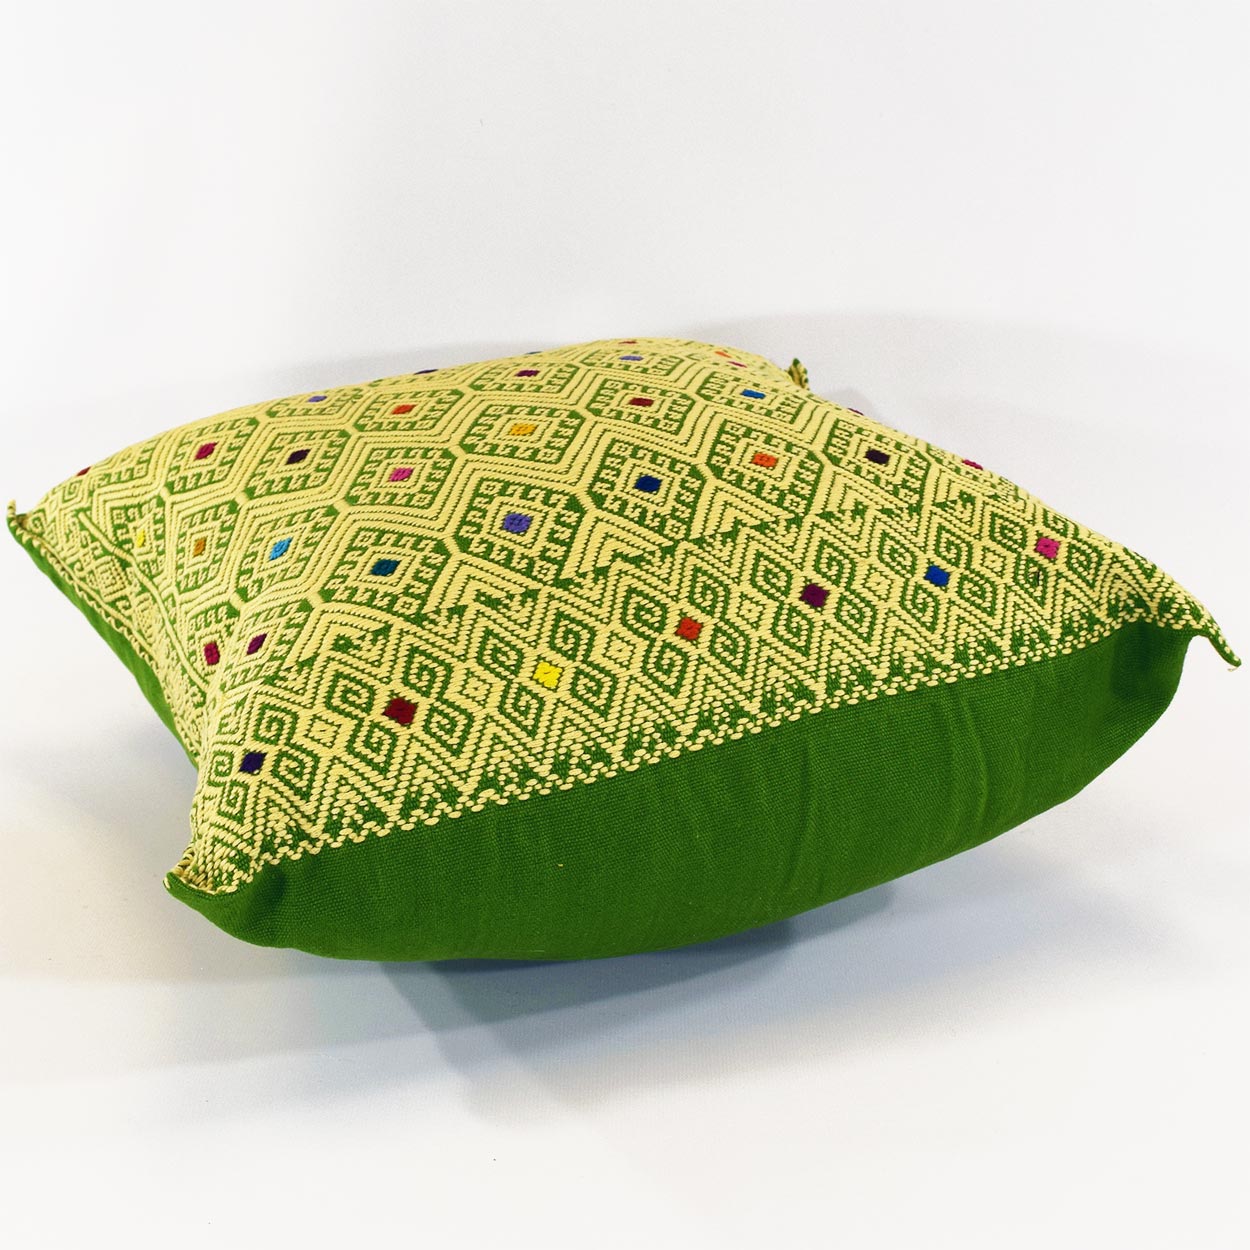 131208-99 - 15in Stitched Chiapas Pillow